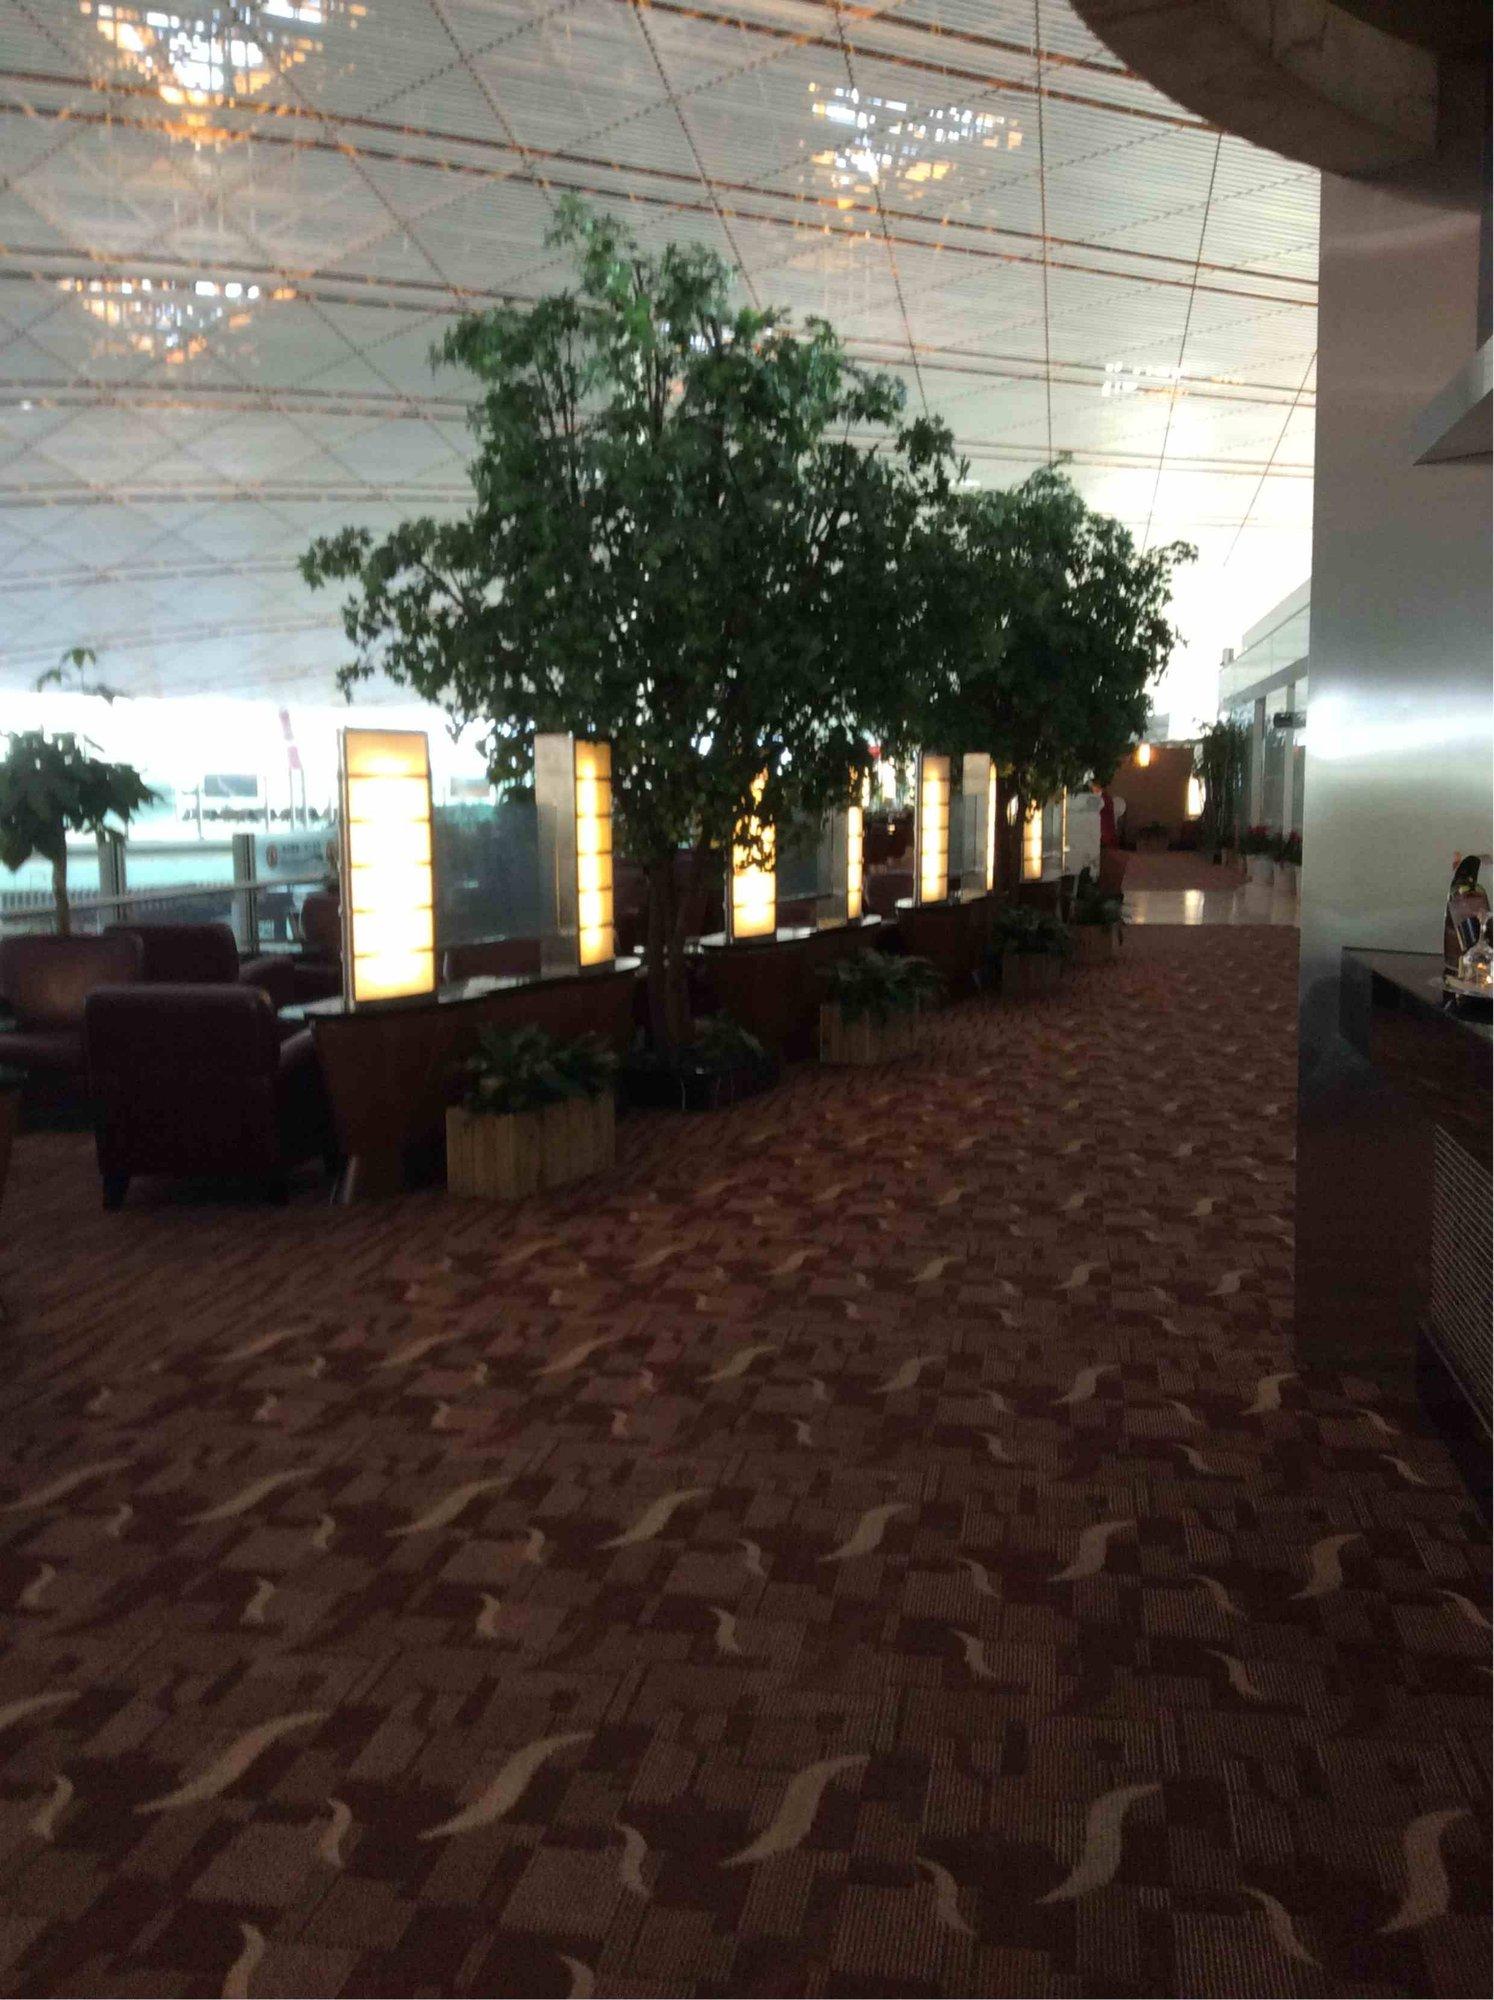 Air China International First Class Lounge image 33 of 38